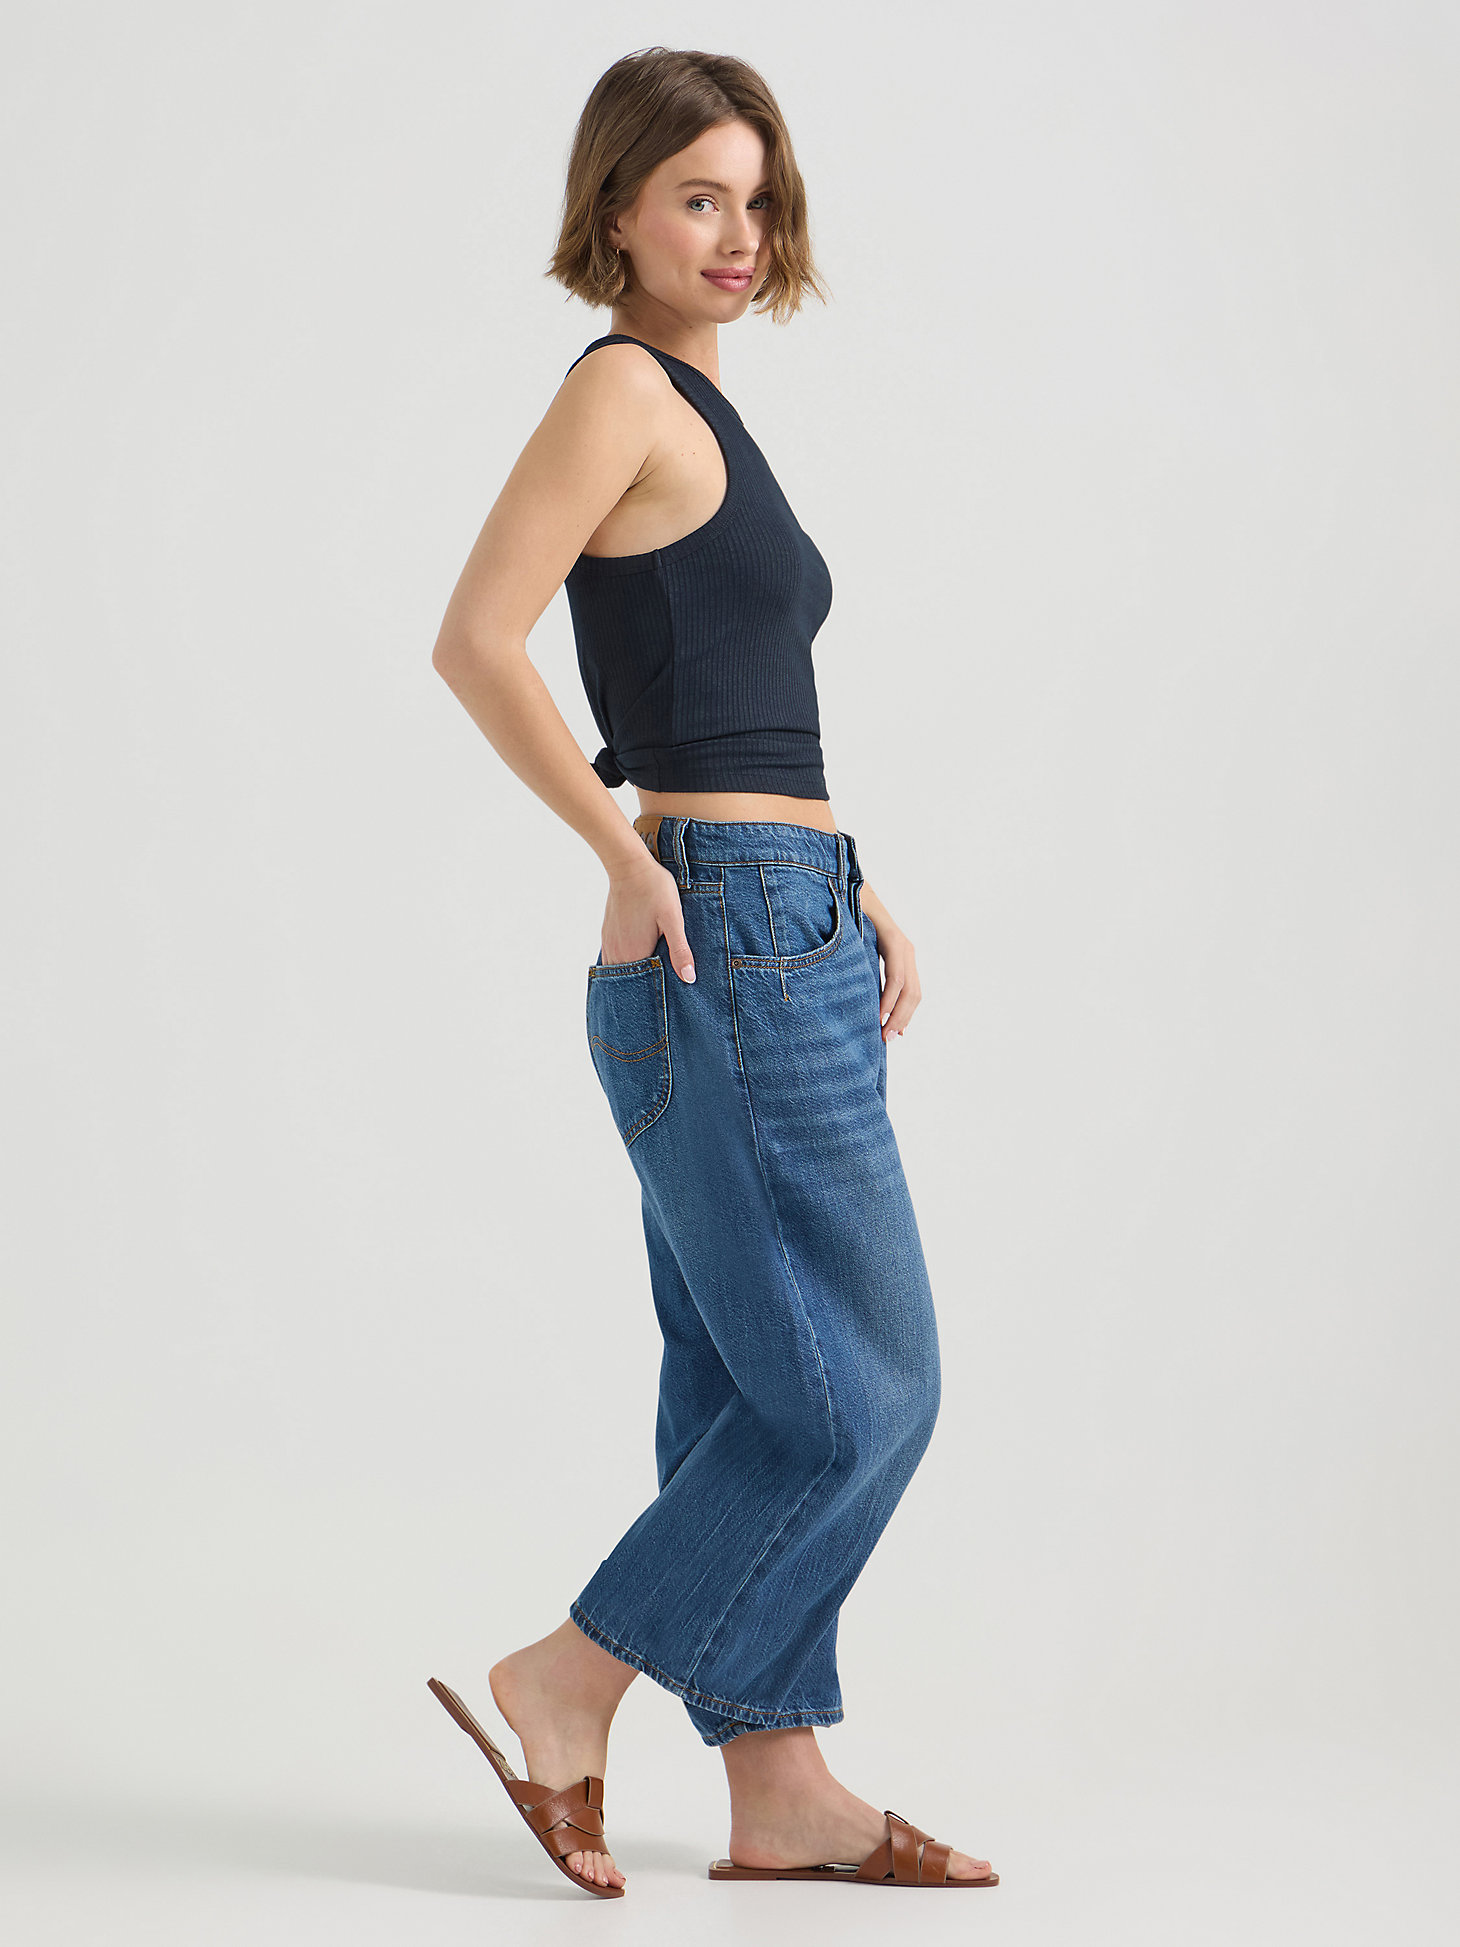 Women's Loose Crop Button-Fly Jean in Robust Blue alternative view 3